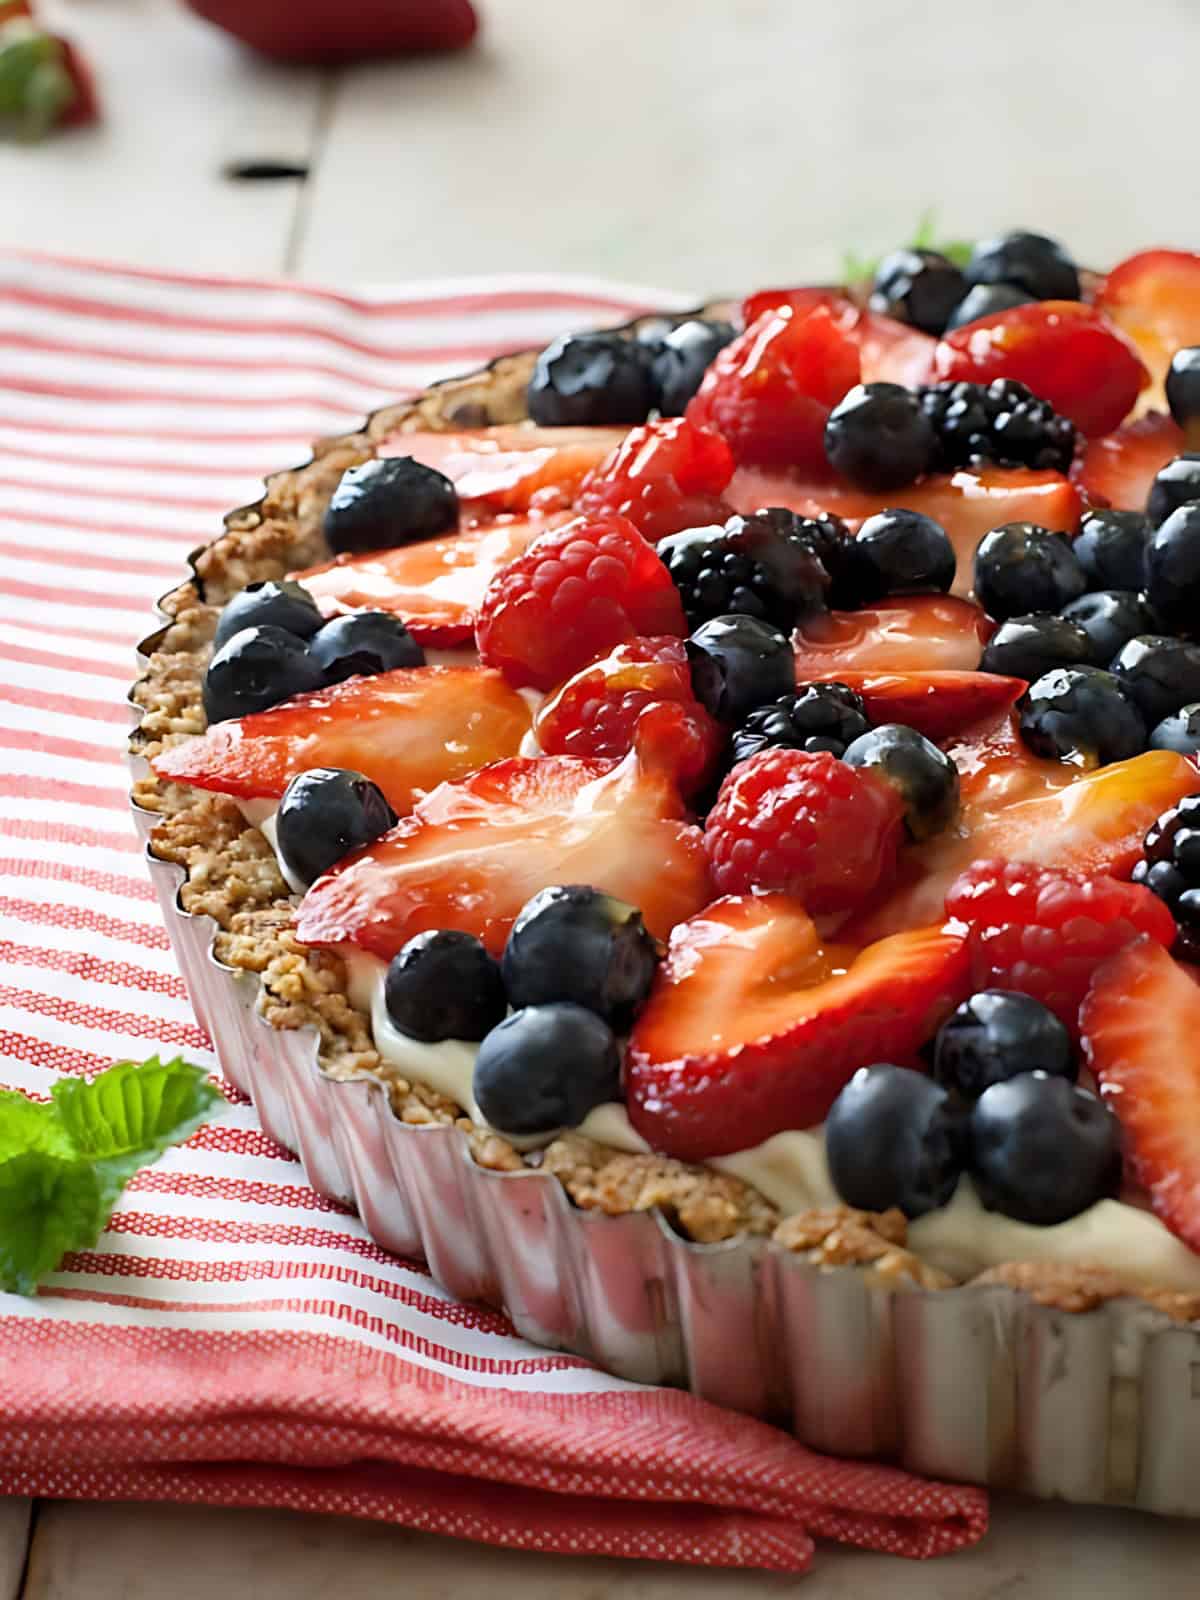 Fruit tart topped with strawberries and berries.